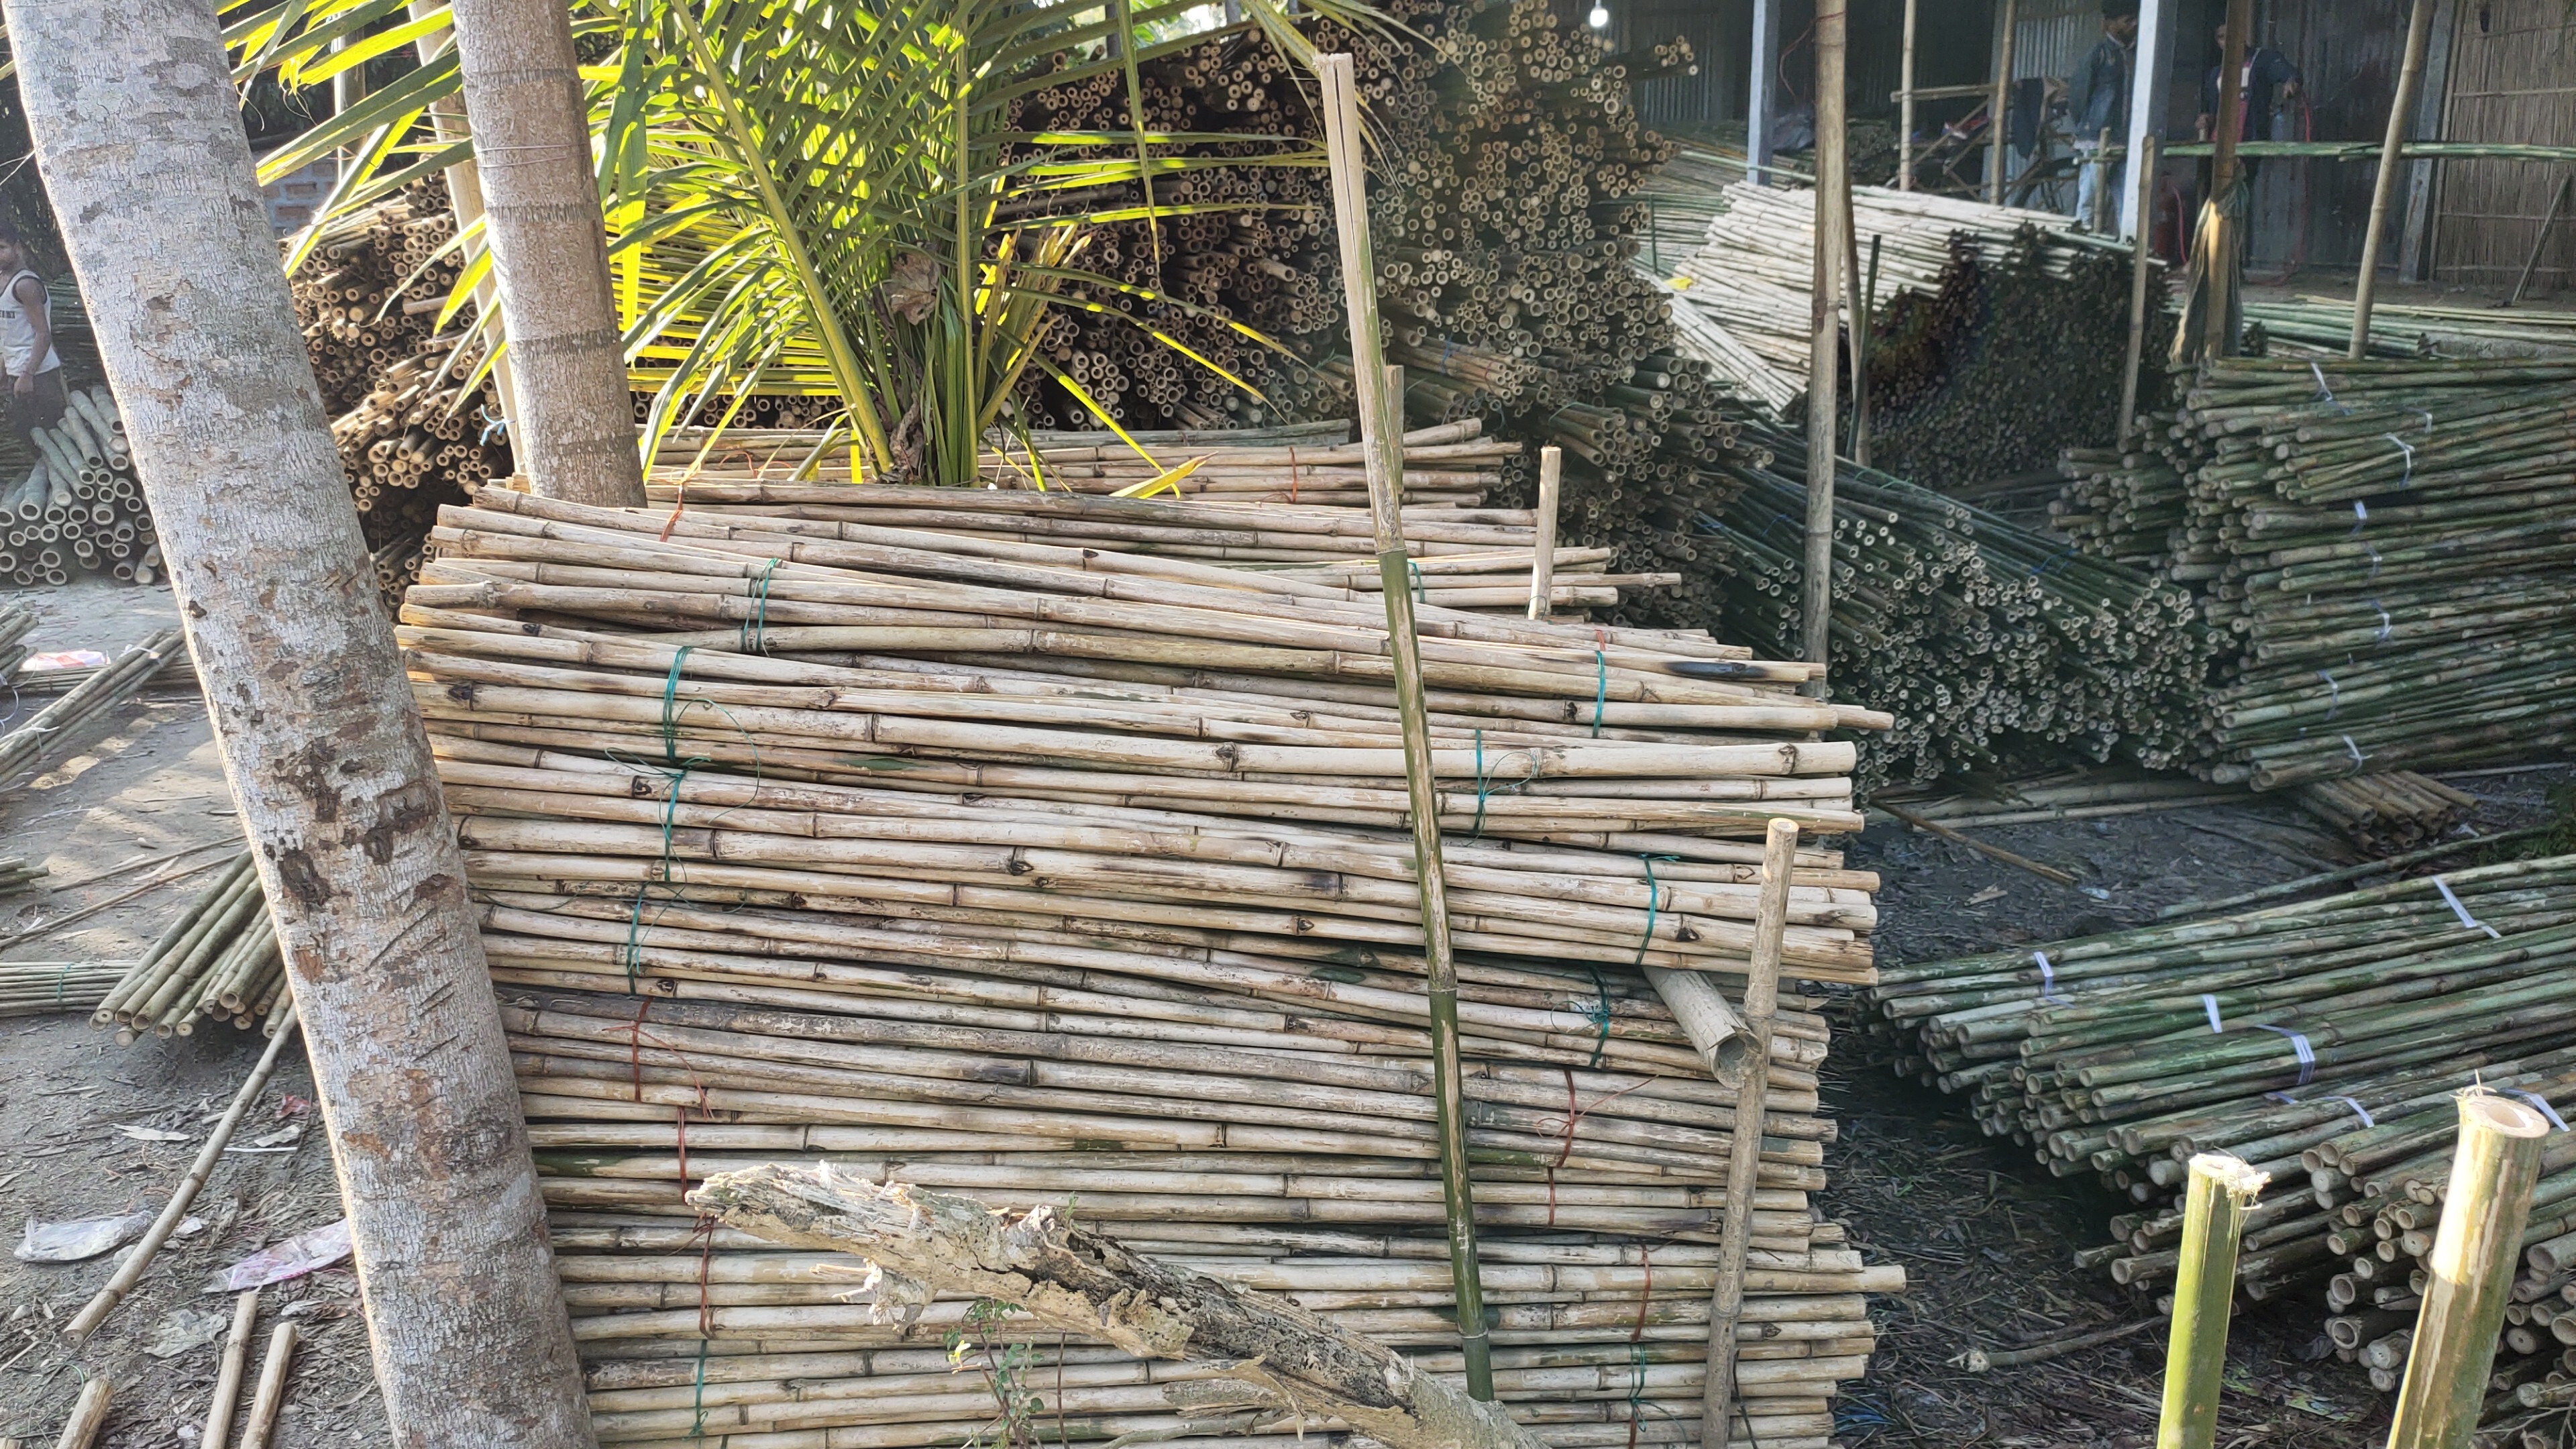 All kinds of bamboo sticks for plantation